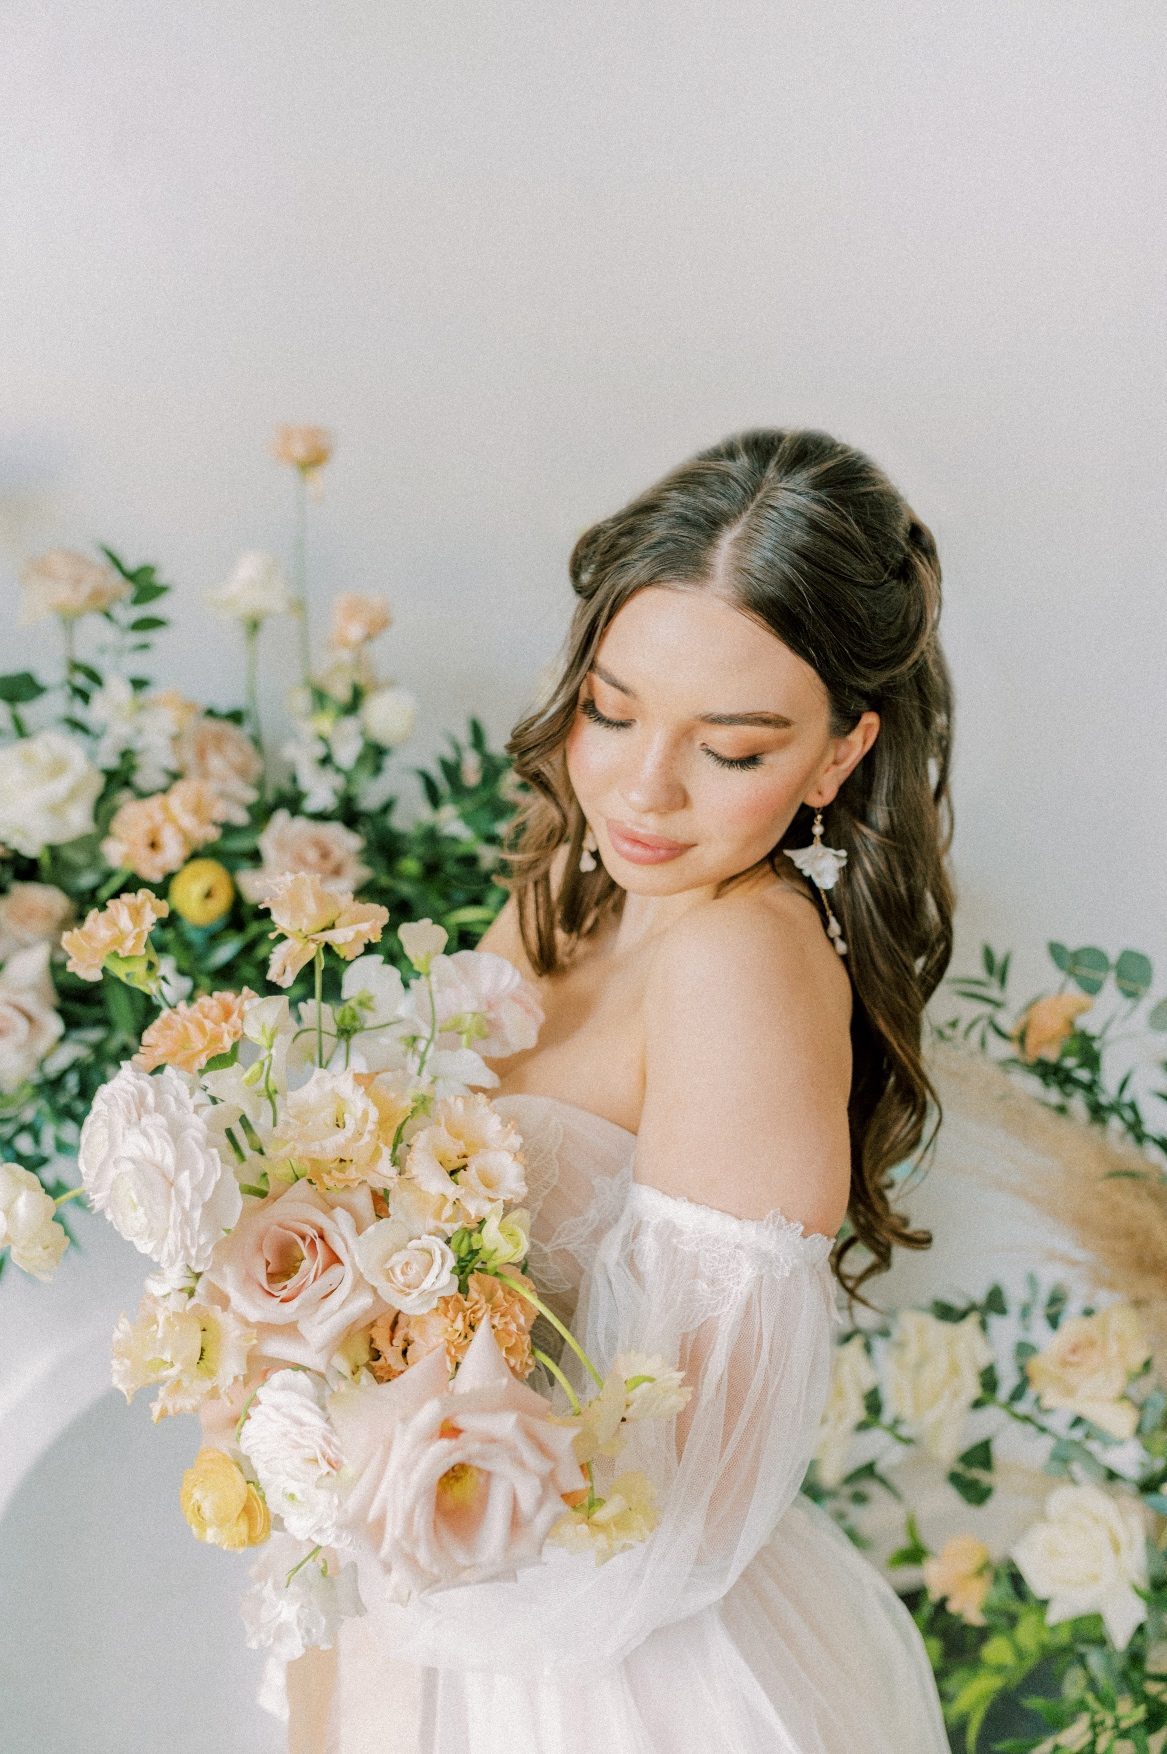 A Calyx Floral Design model stands in front of large peach floral arrangements, holding up her bridal bouquet and gazing down at it